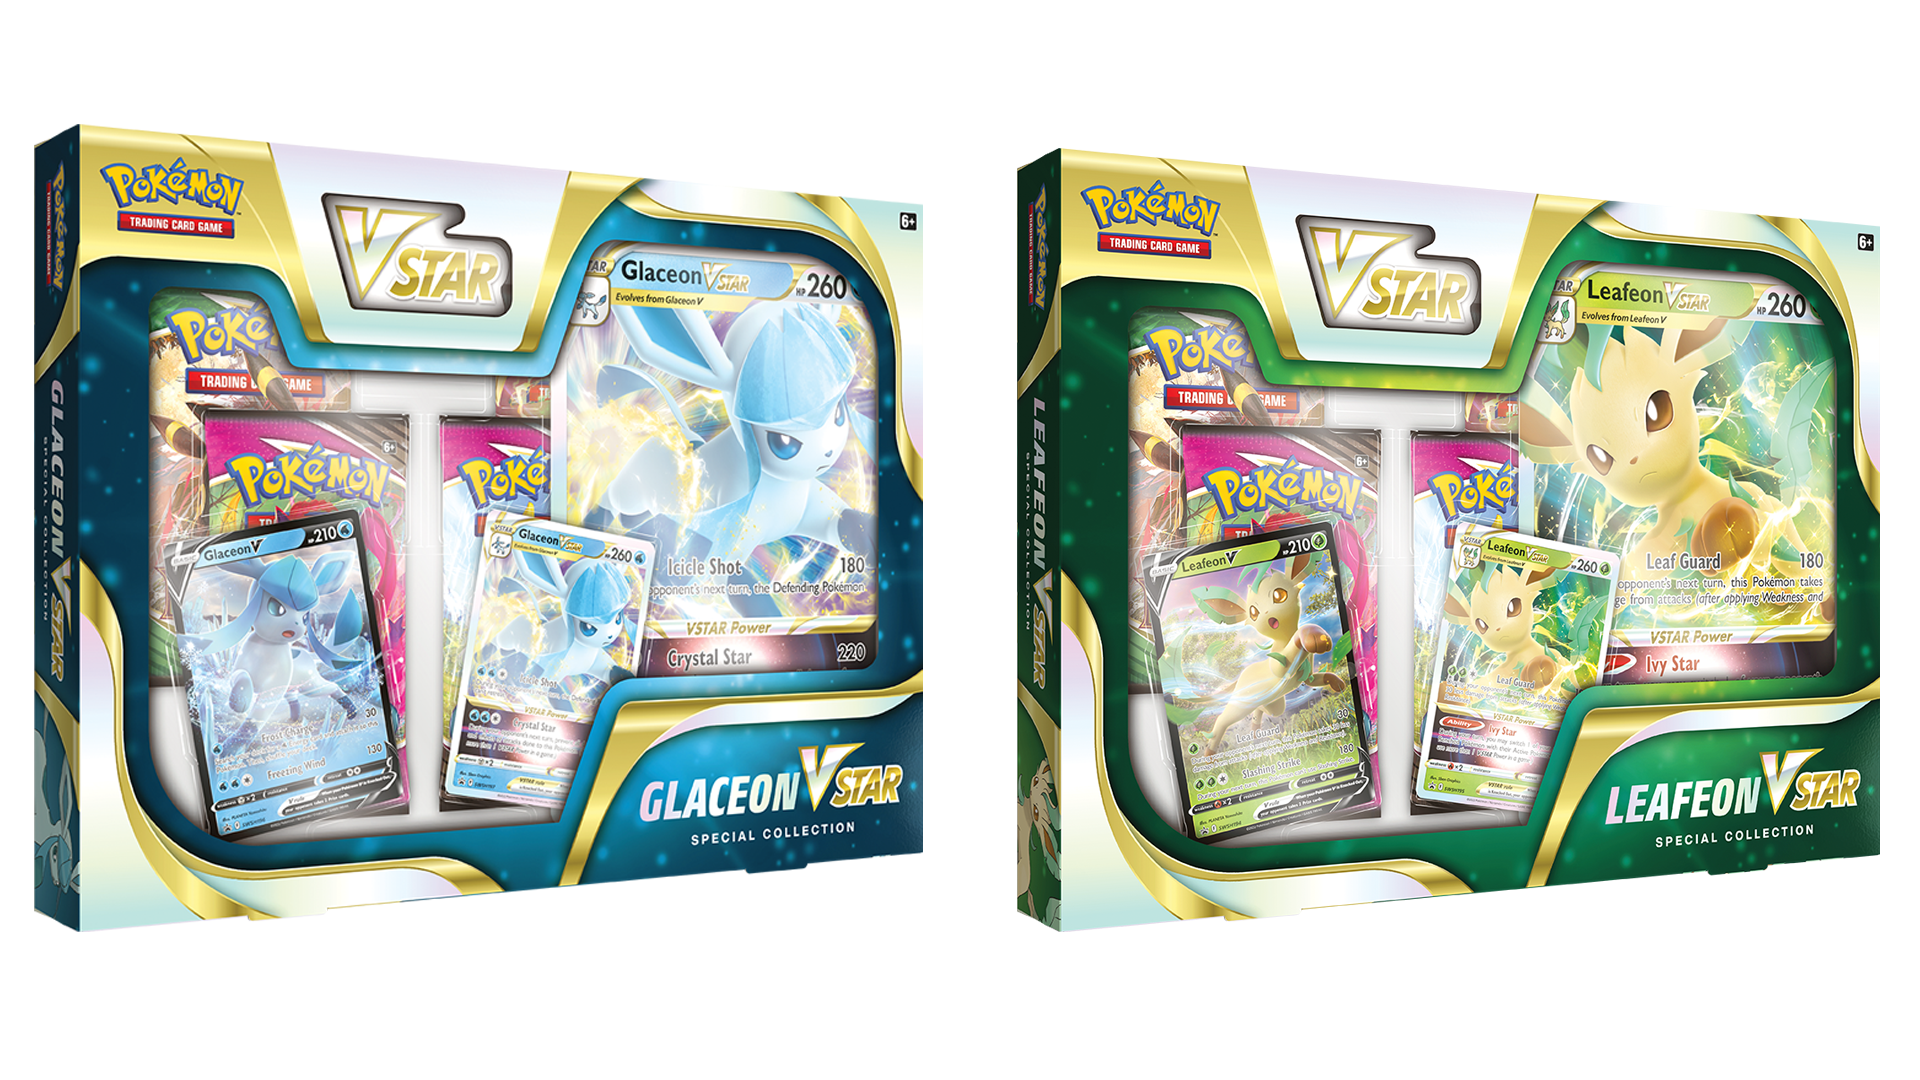 Pokémon: Trading Card Game Sword & Shield - Brilliant Stars Leafeon & Glaceon Vstar Collections